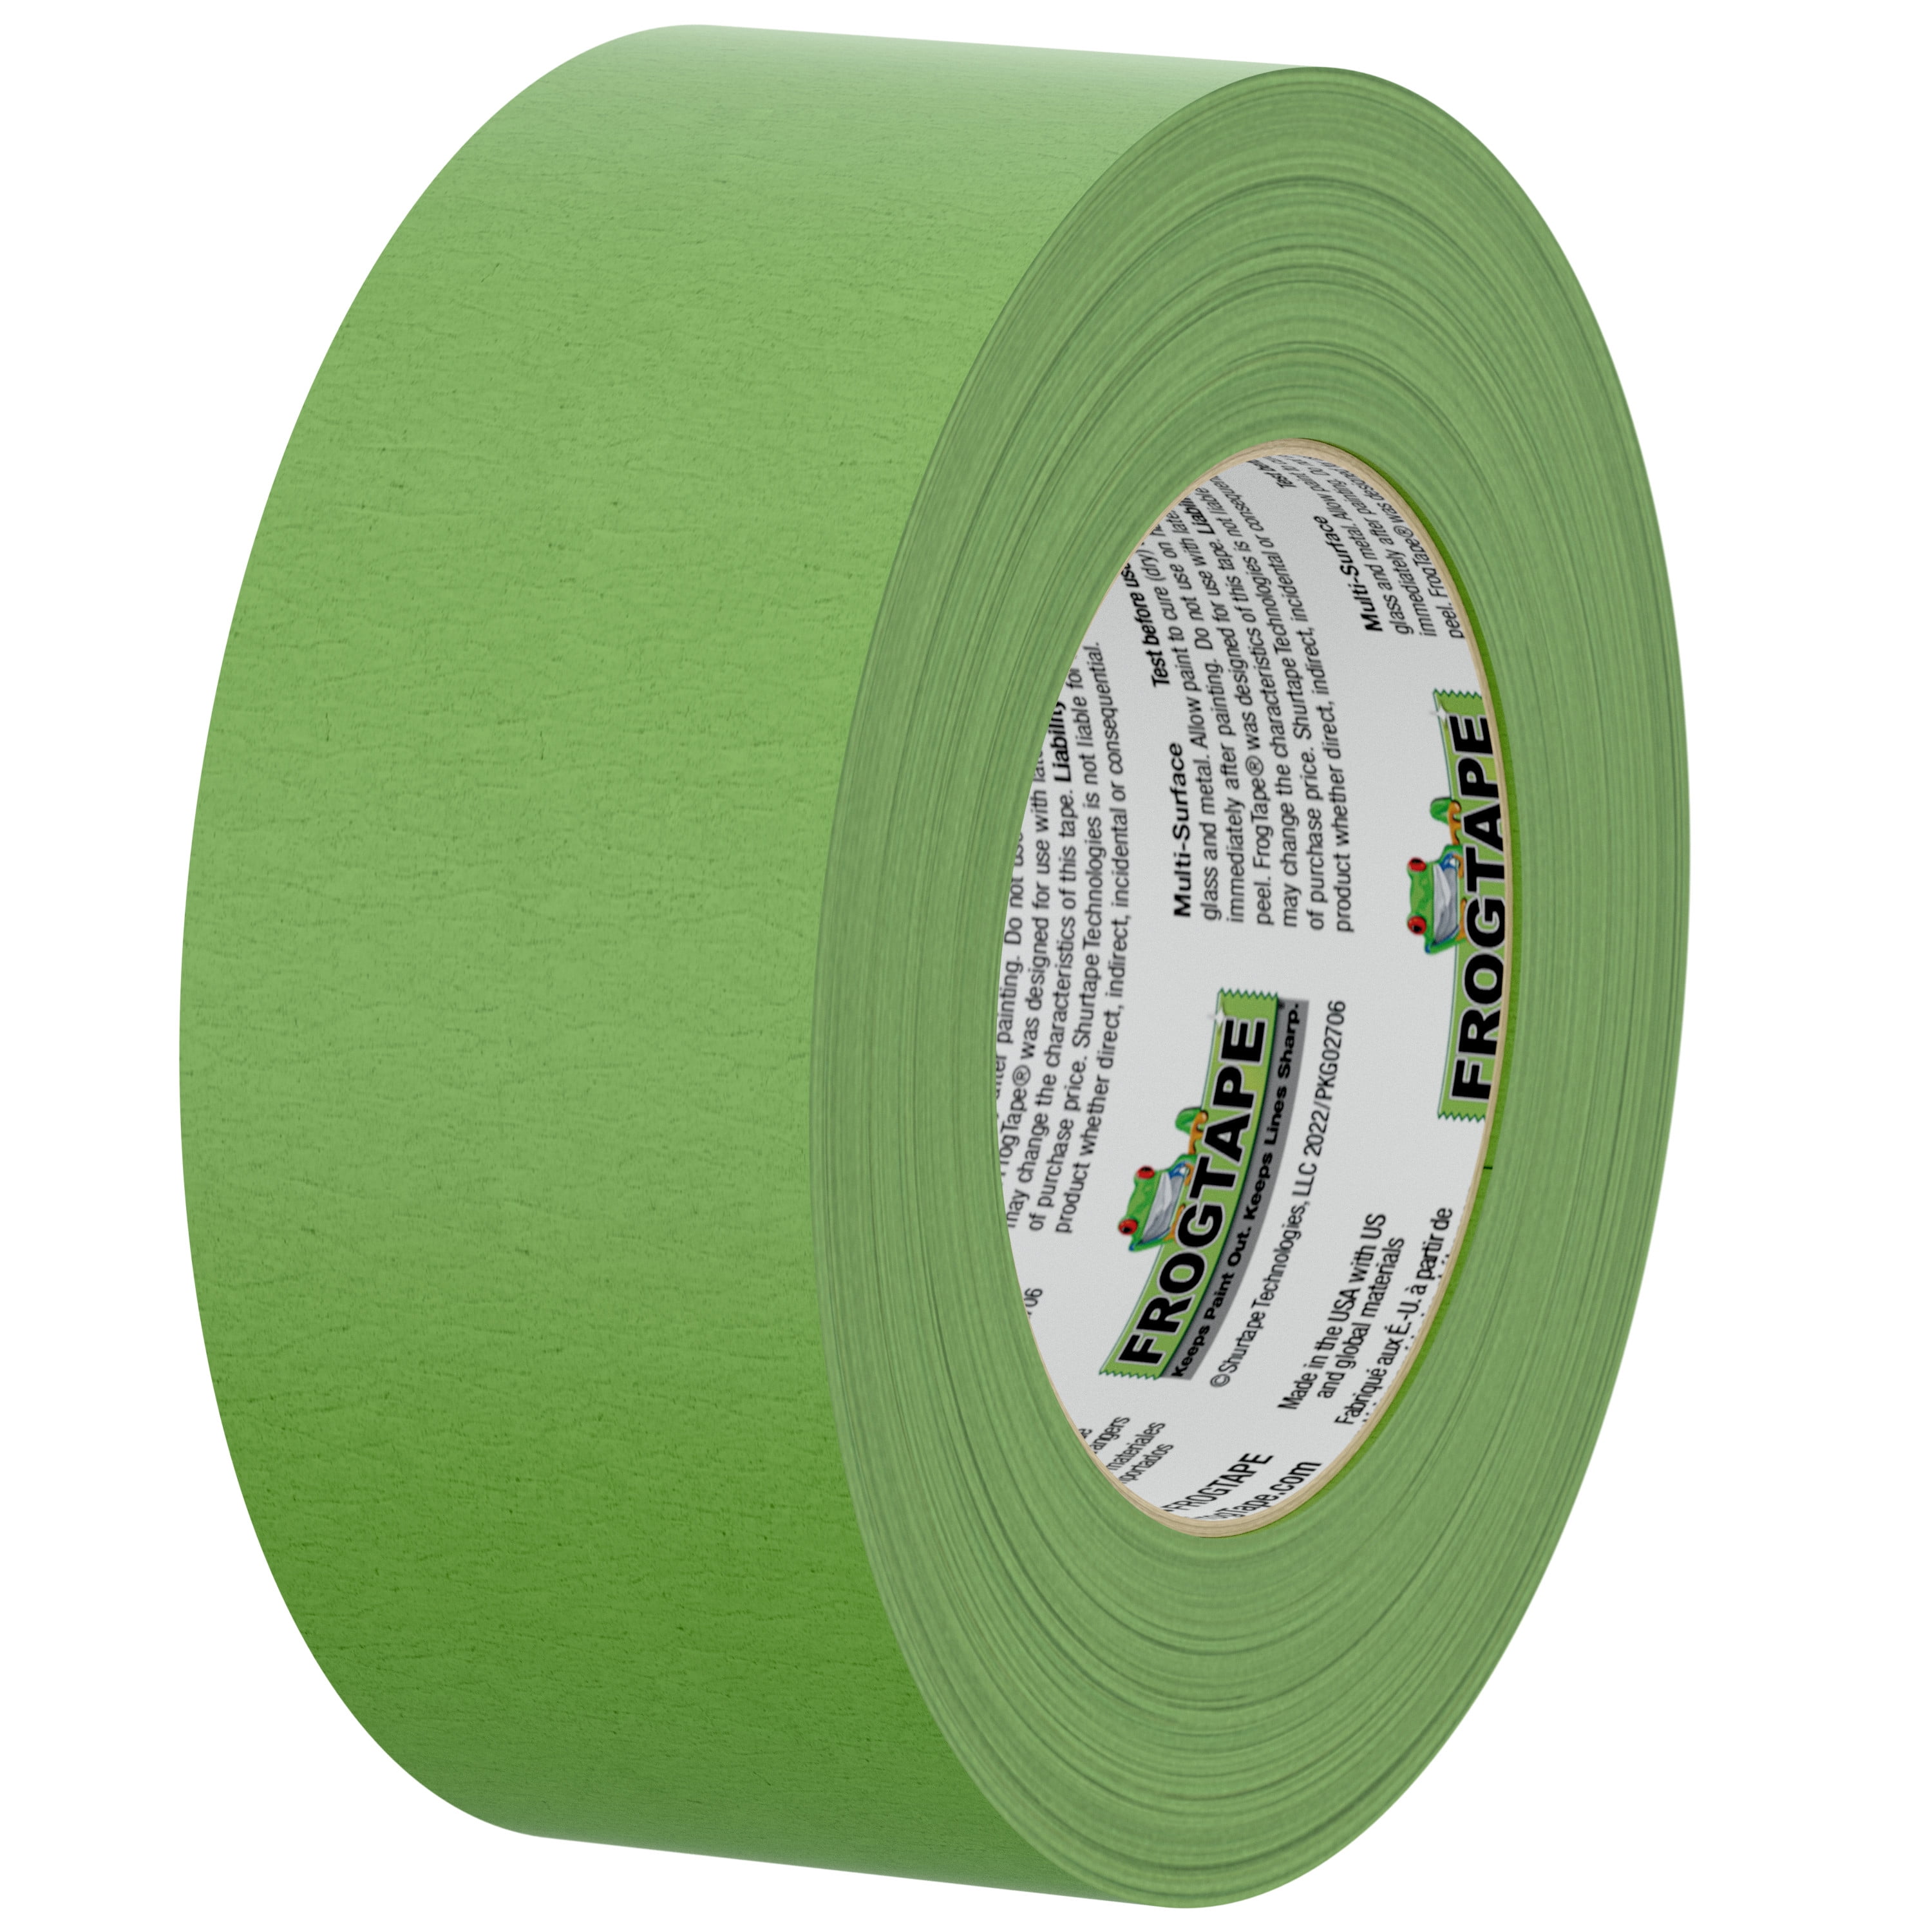 FrogTape 1.88 in. x 60 yd. Green Multi-Surface Painter's Tape, 3